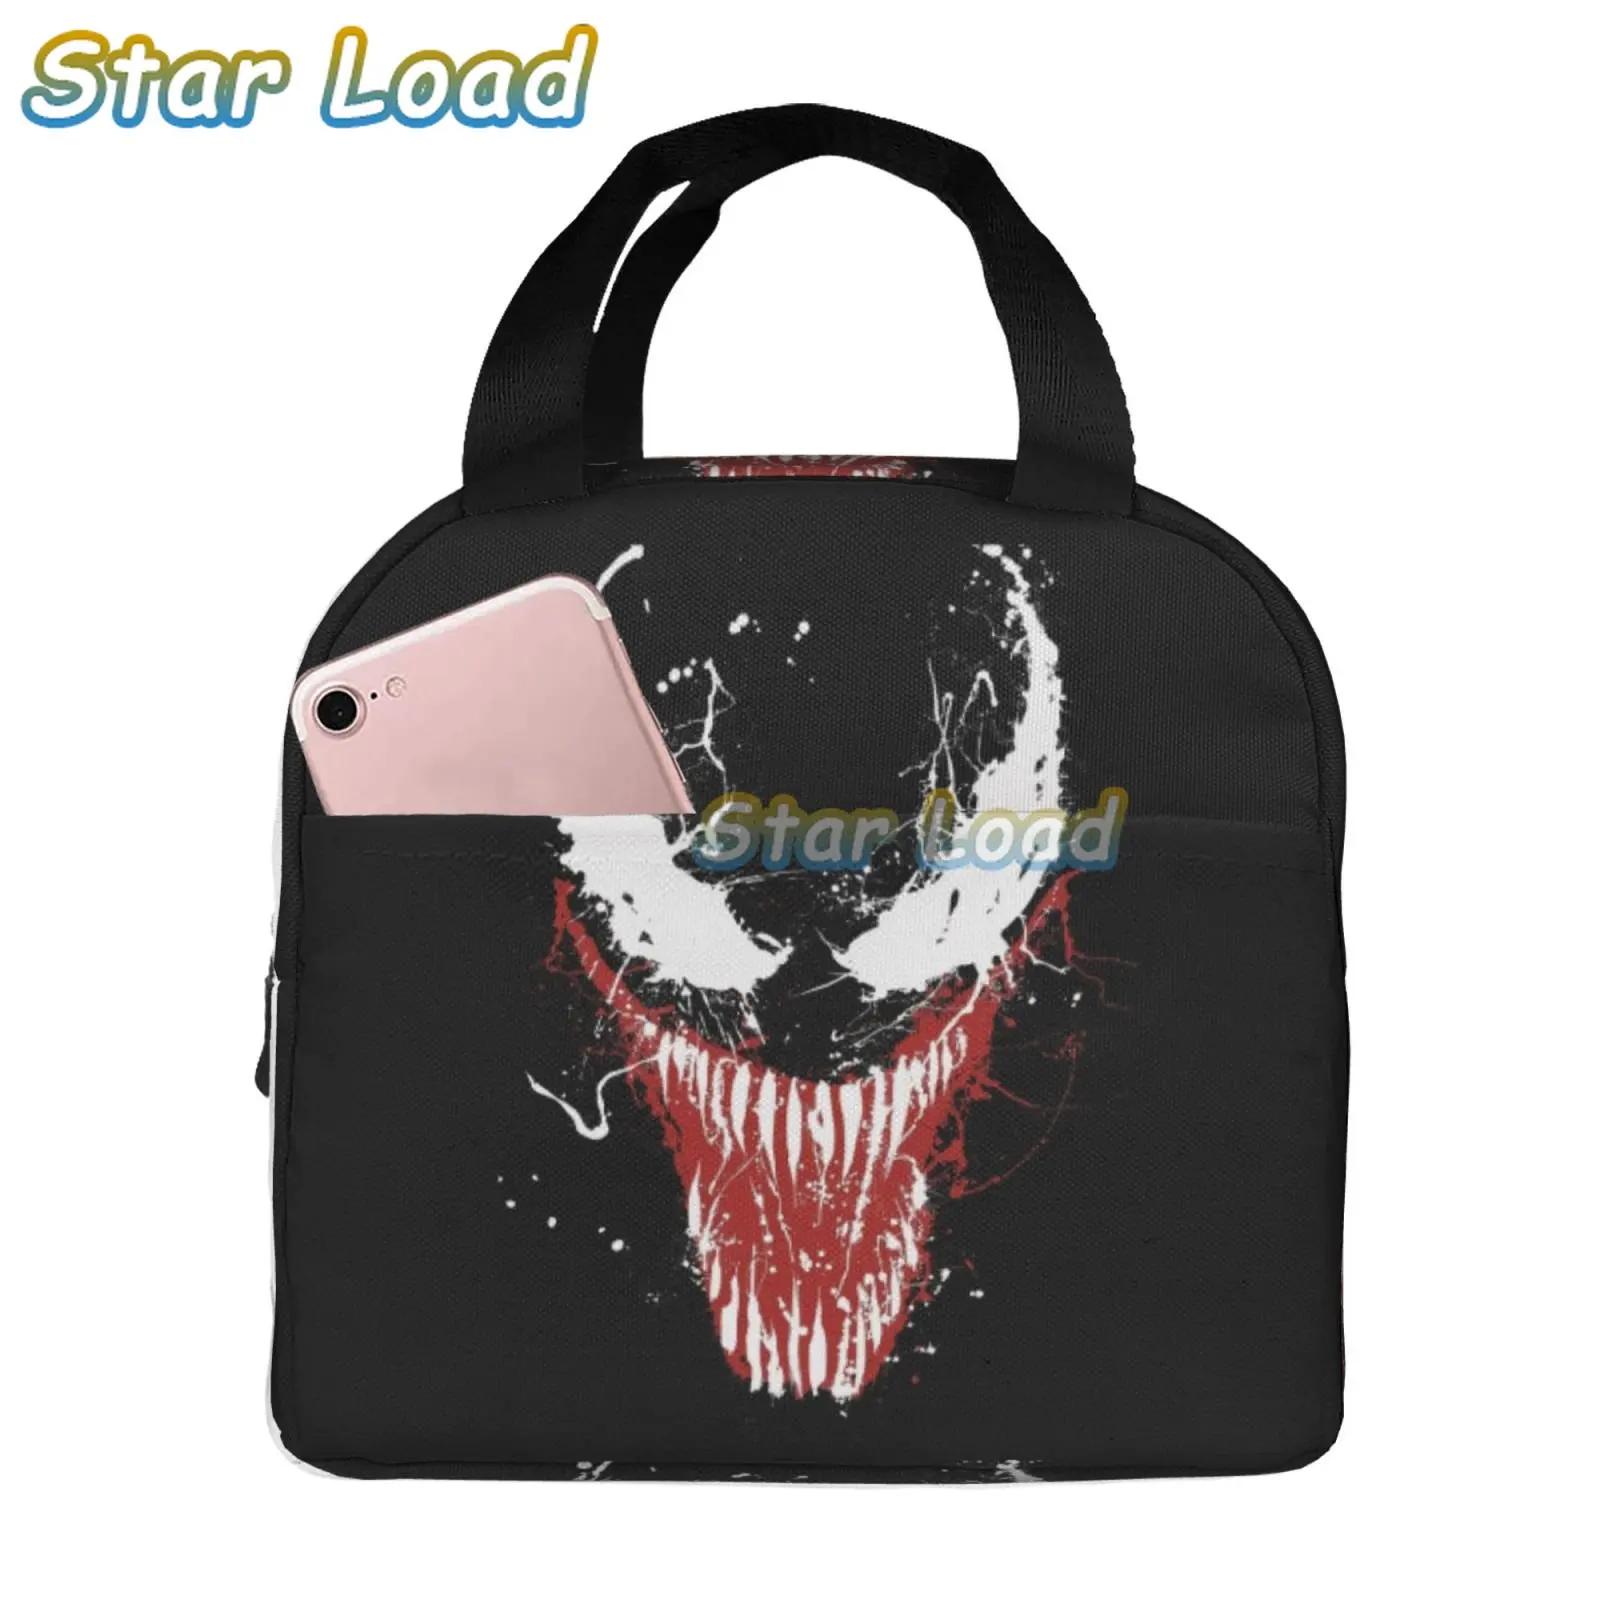 

Children's Cooler Lunch Bag VENOM Picture 3D Printing Kids School Thermal Bag Outdoor Picnic for Food Lunch Bag Girls Boys